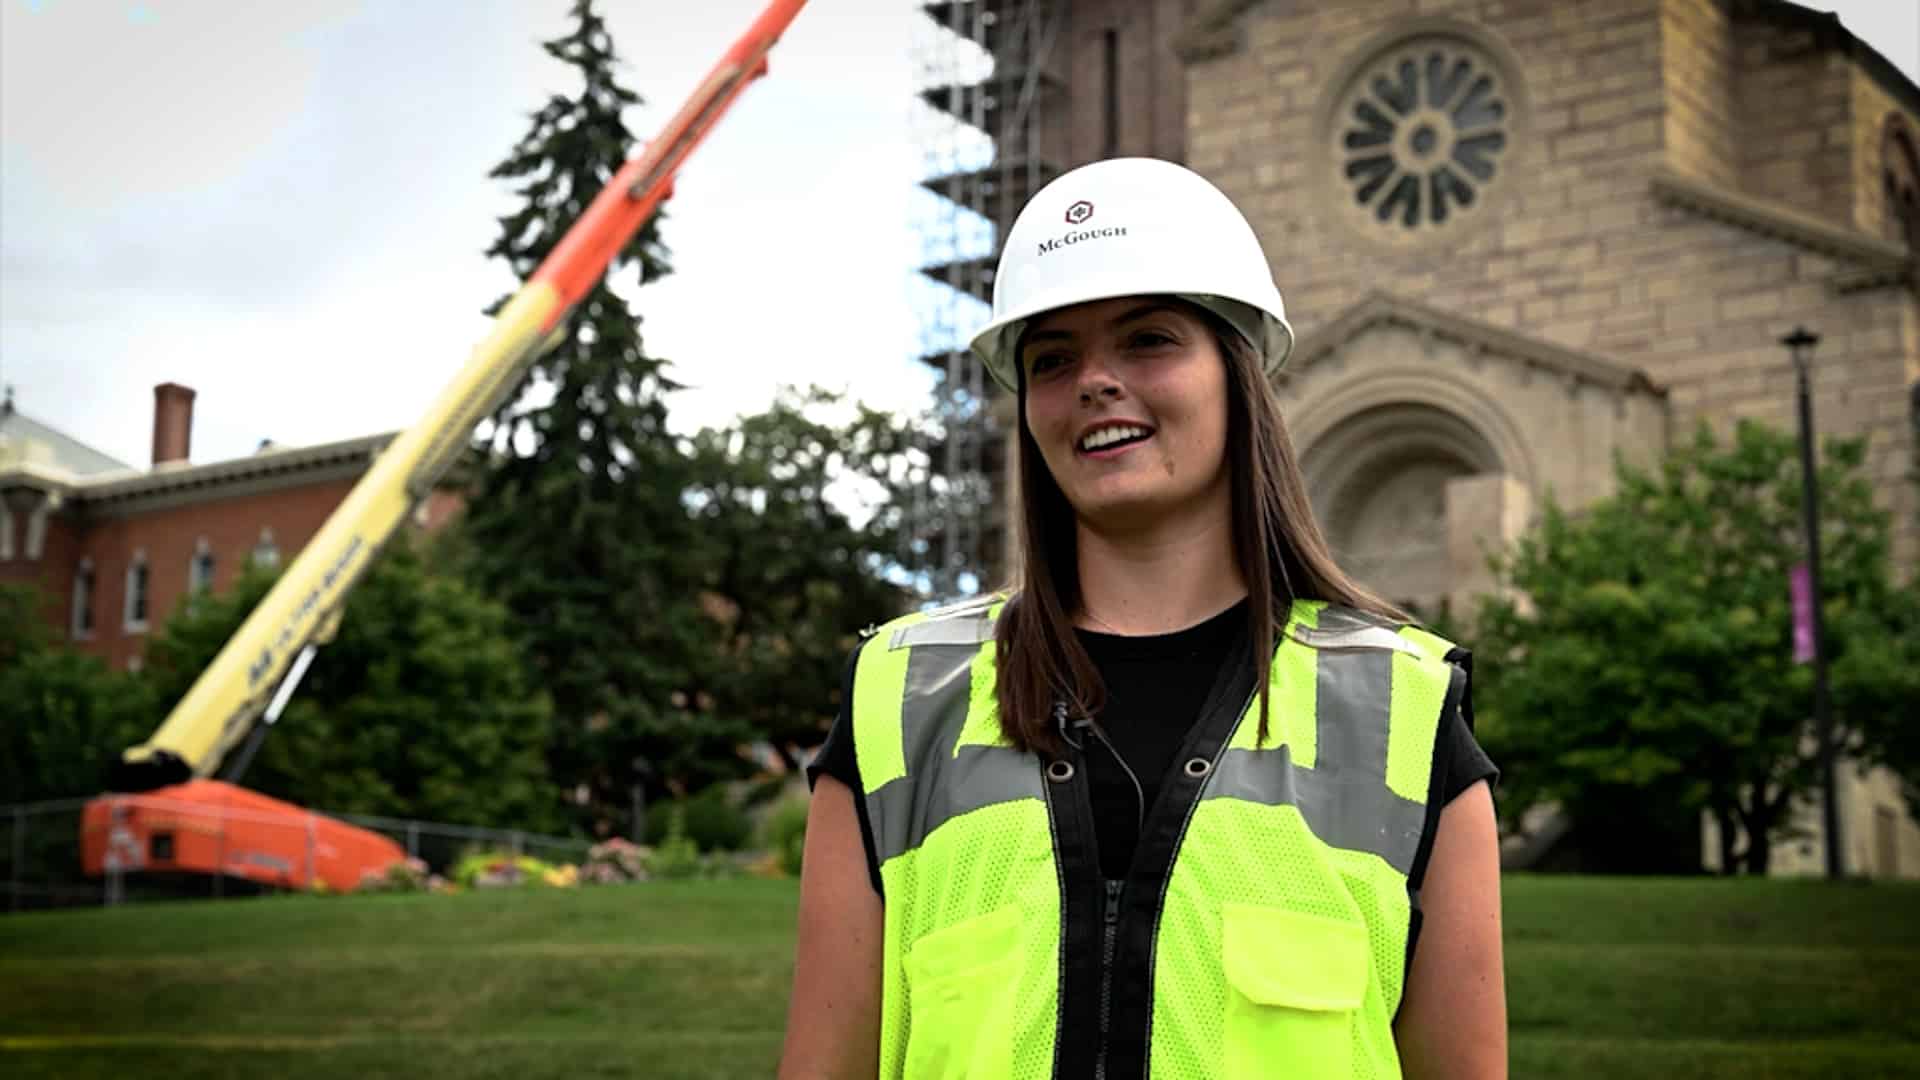 Image of McGough intern Lindsey Hays, wearing hard hat and yellow vest